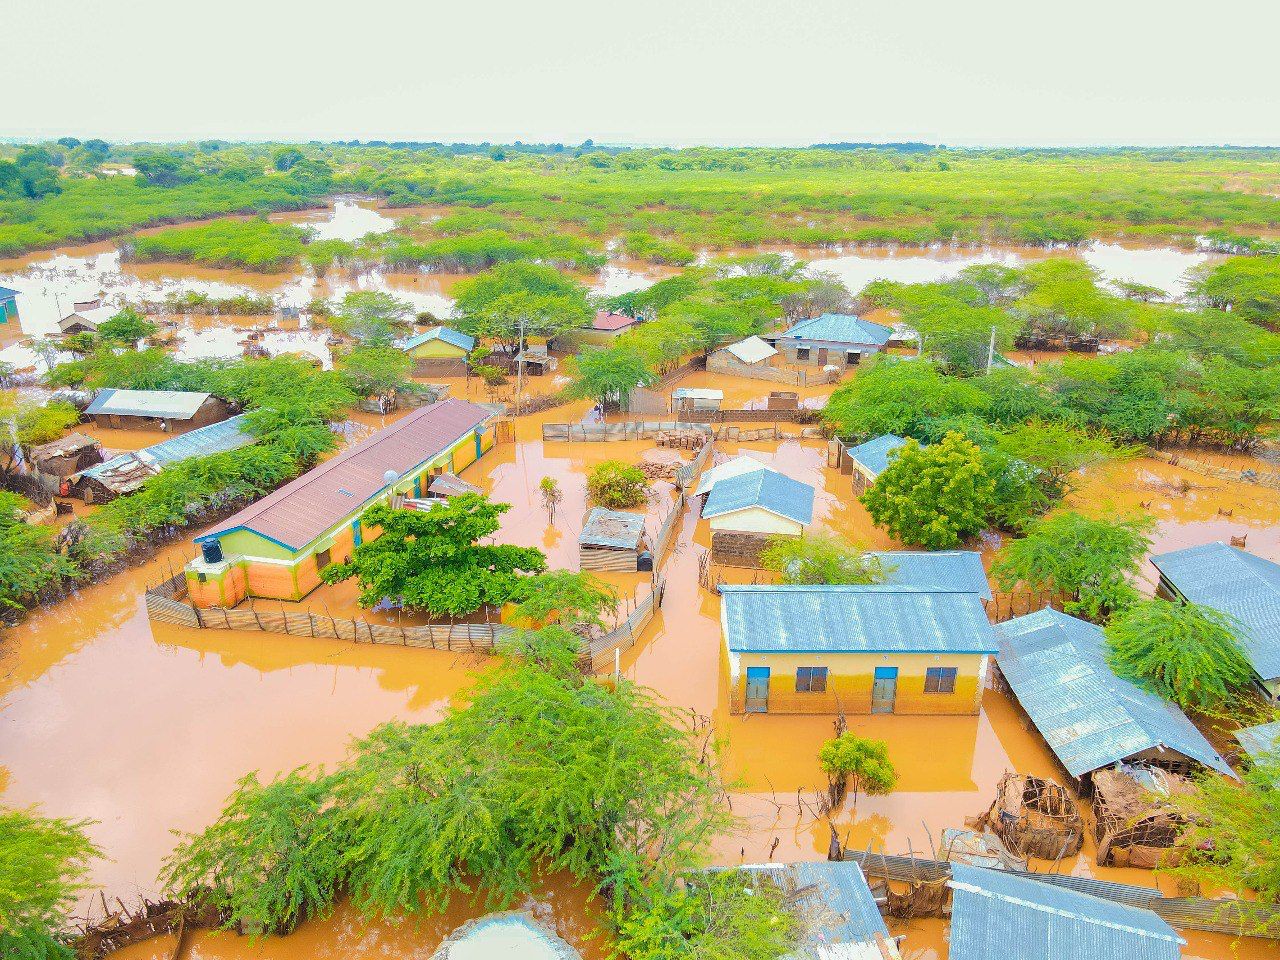 Food, fuel and water crises hit Garissa town